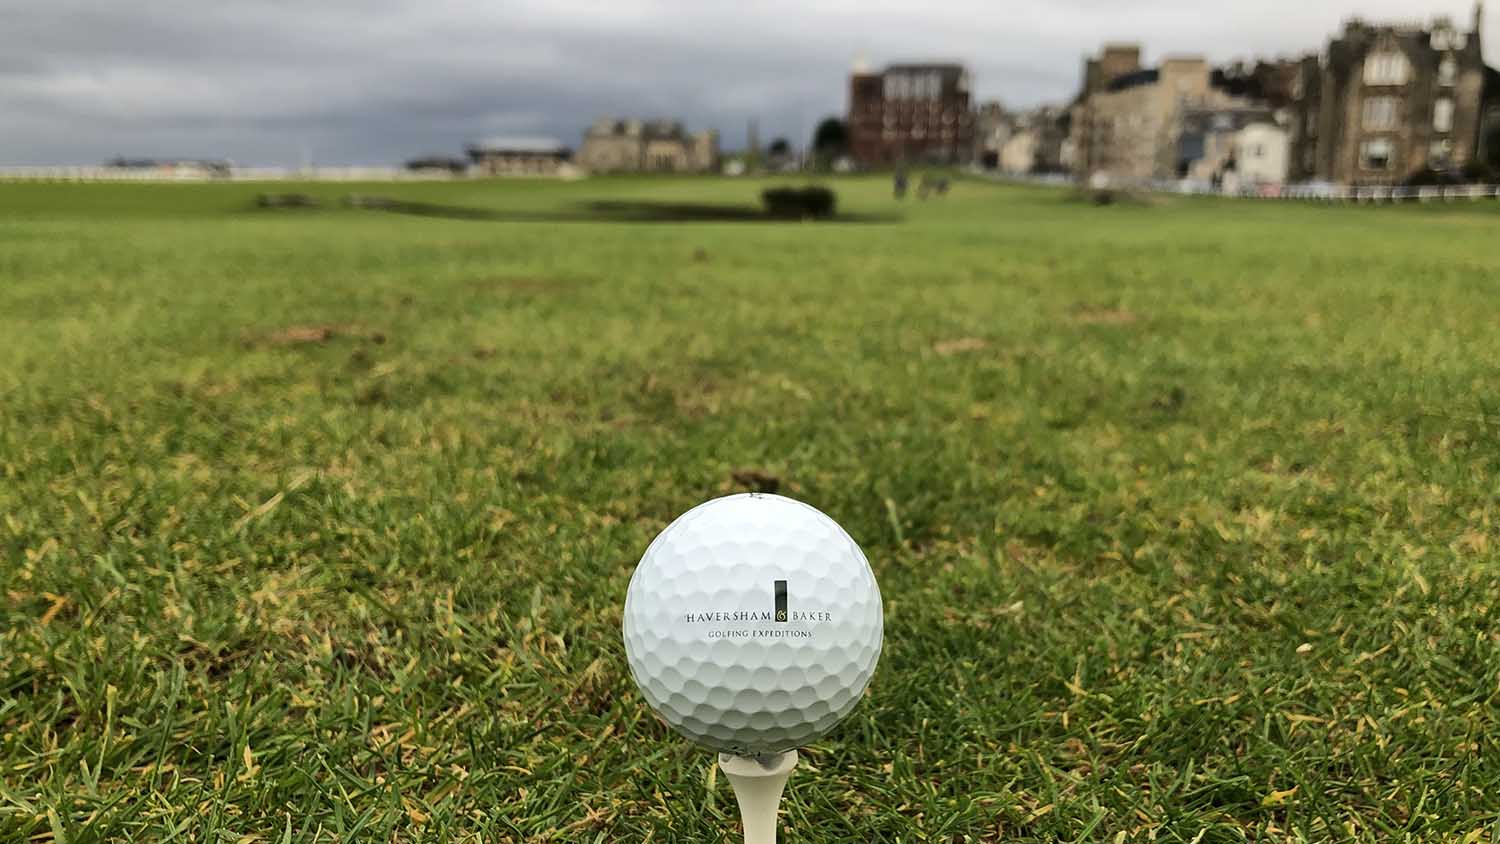 First Open Championship St. Andrews